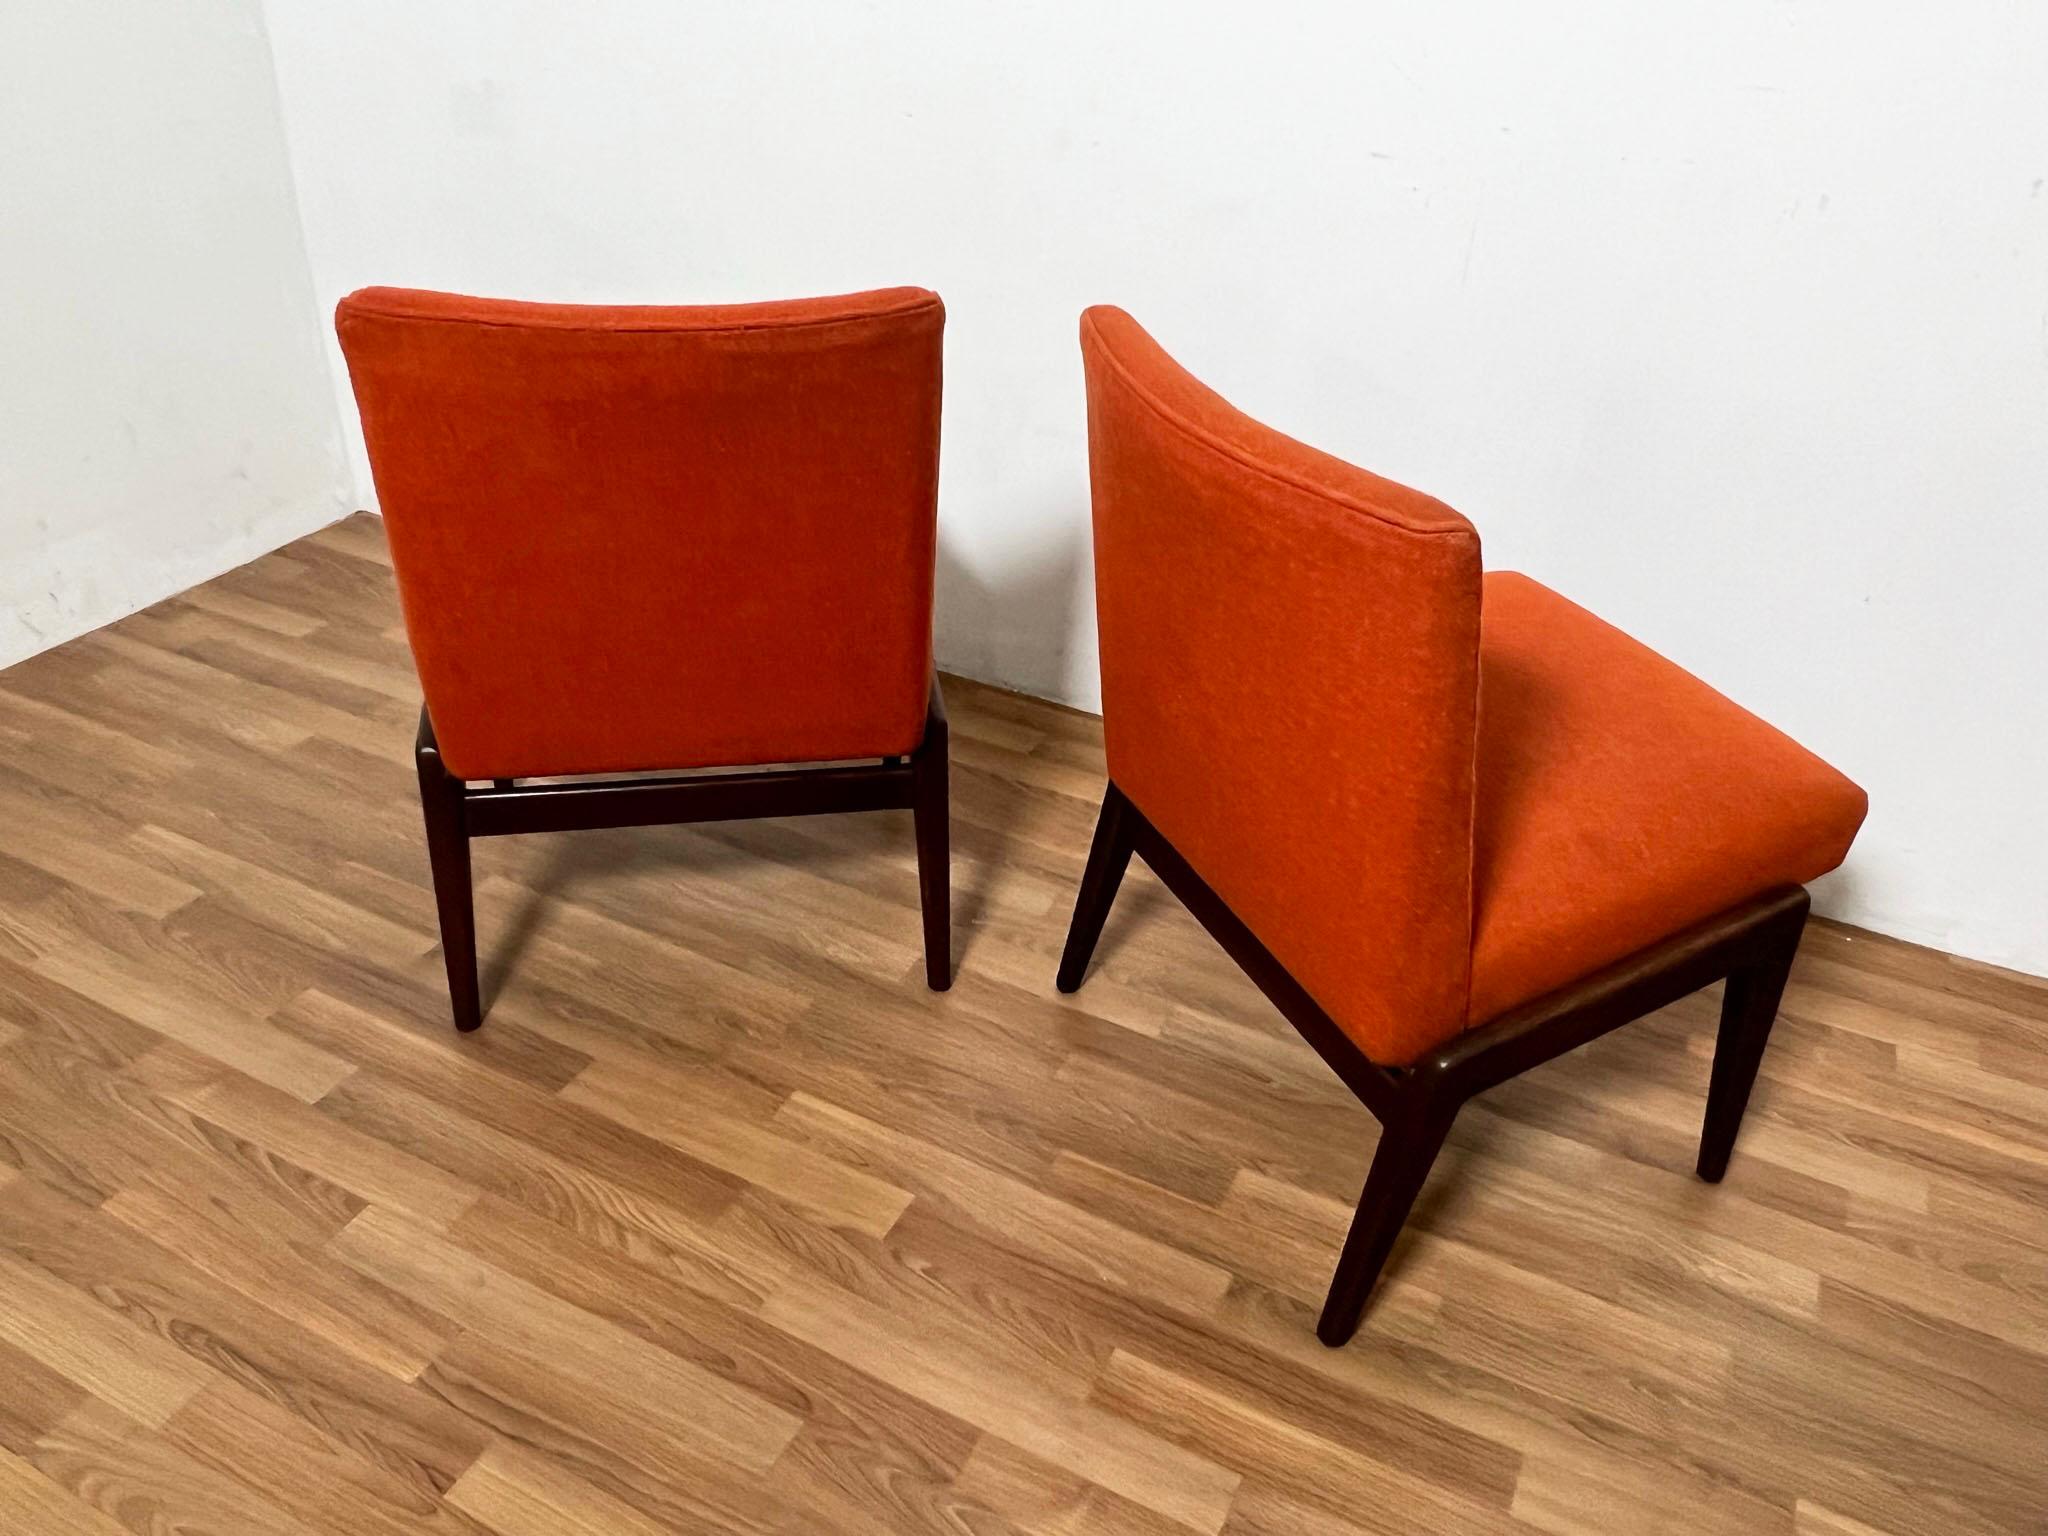 Pair of Jens Risom C-220 Lounge Chairs Circa 1950s For Sale 2